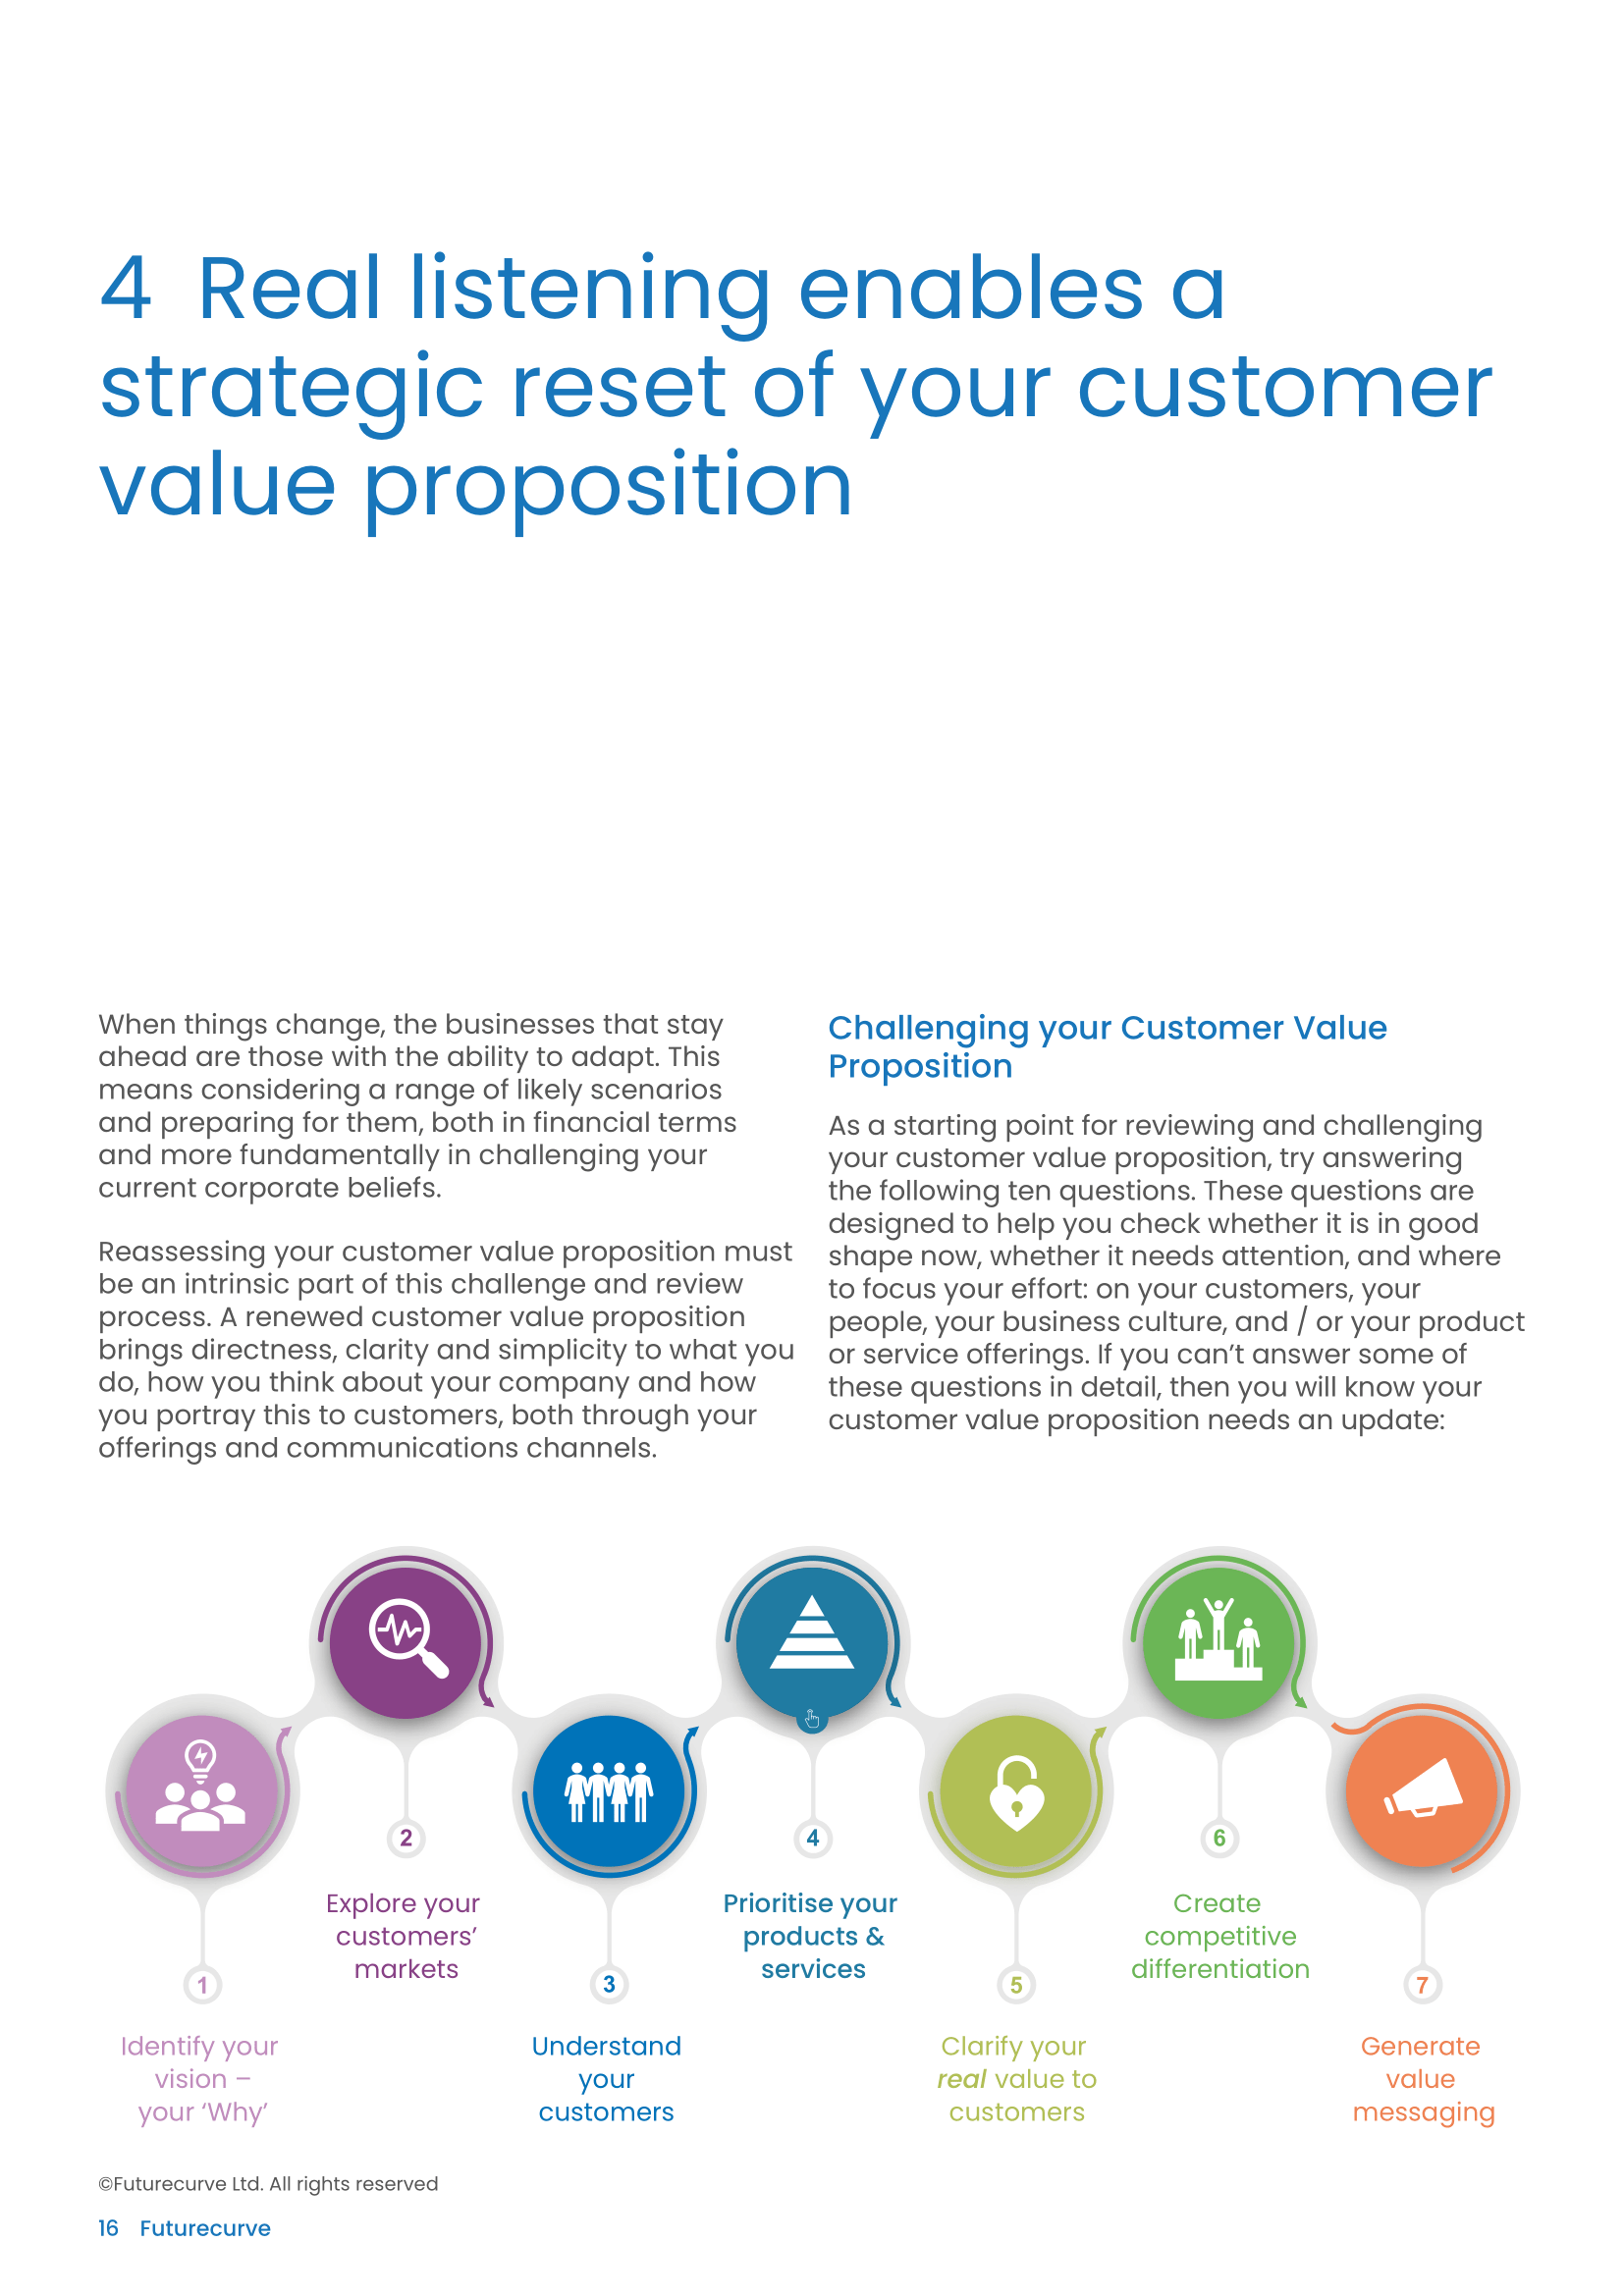 What do customers want now - A Futurecurve White Paper (2) (1)-16